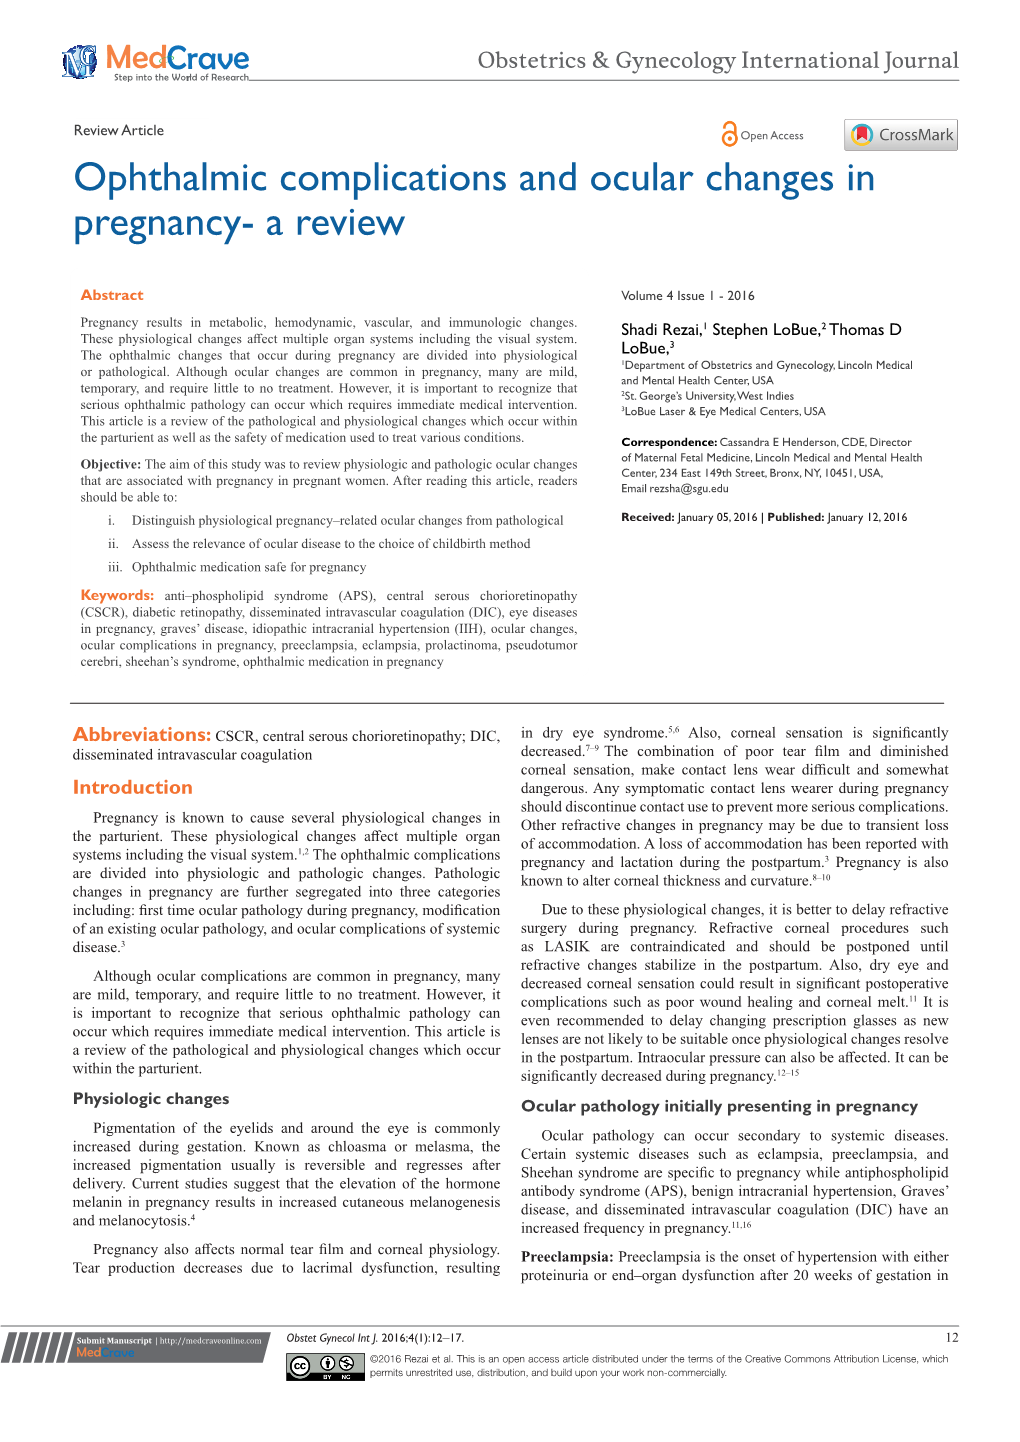 Ophthalmic Complications and Ocular Changes in Pregnancy- a Review